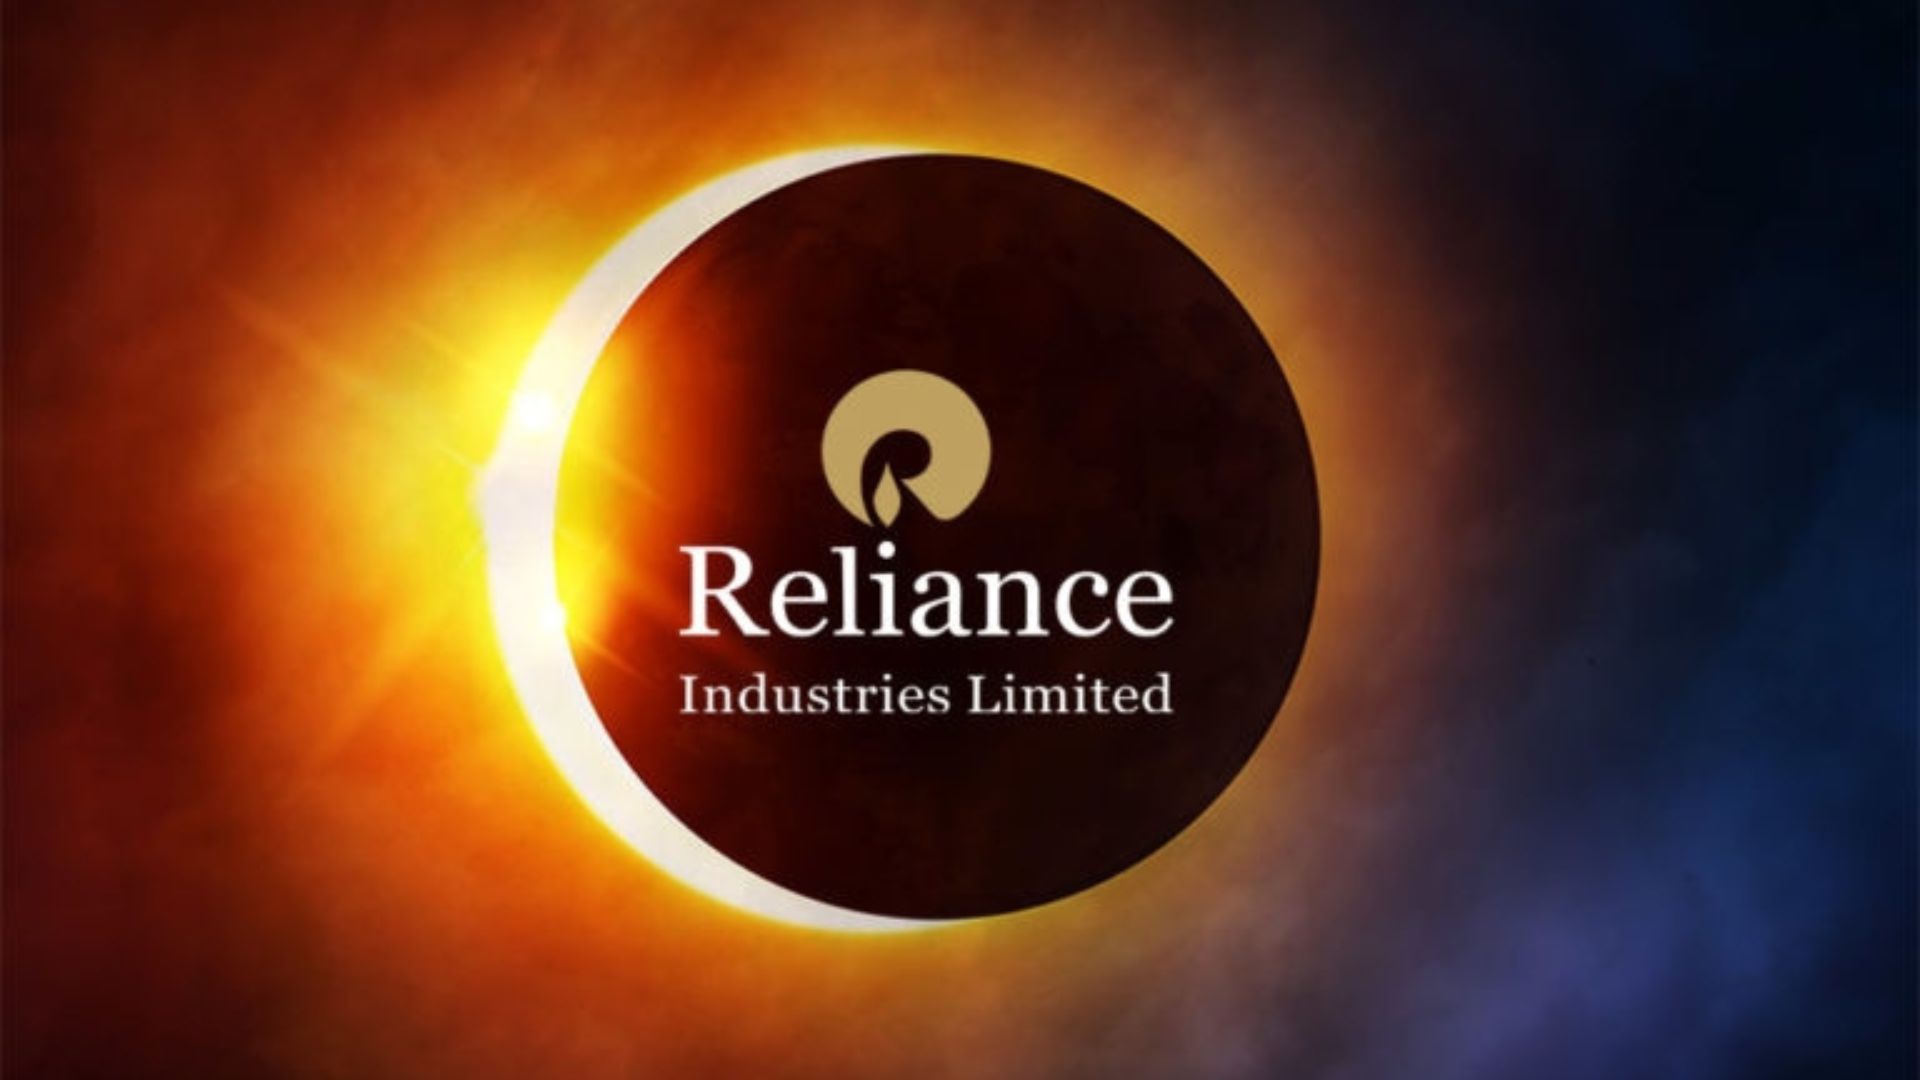 Reliance Industries Q2 Earnings: 27% Surge in Net Profit to ₹17,394 Crores  | Money control, Reliance, Previous year